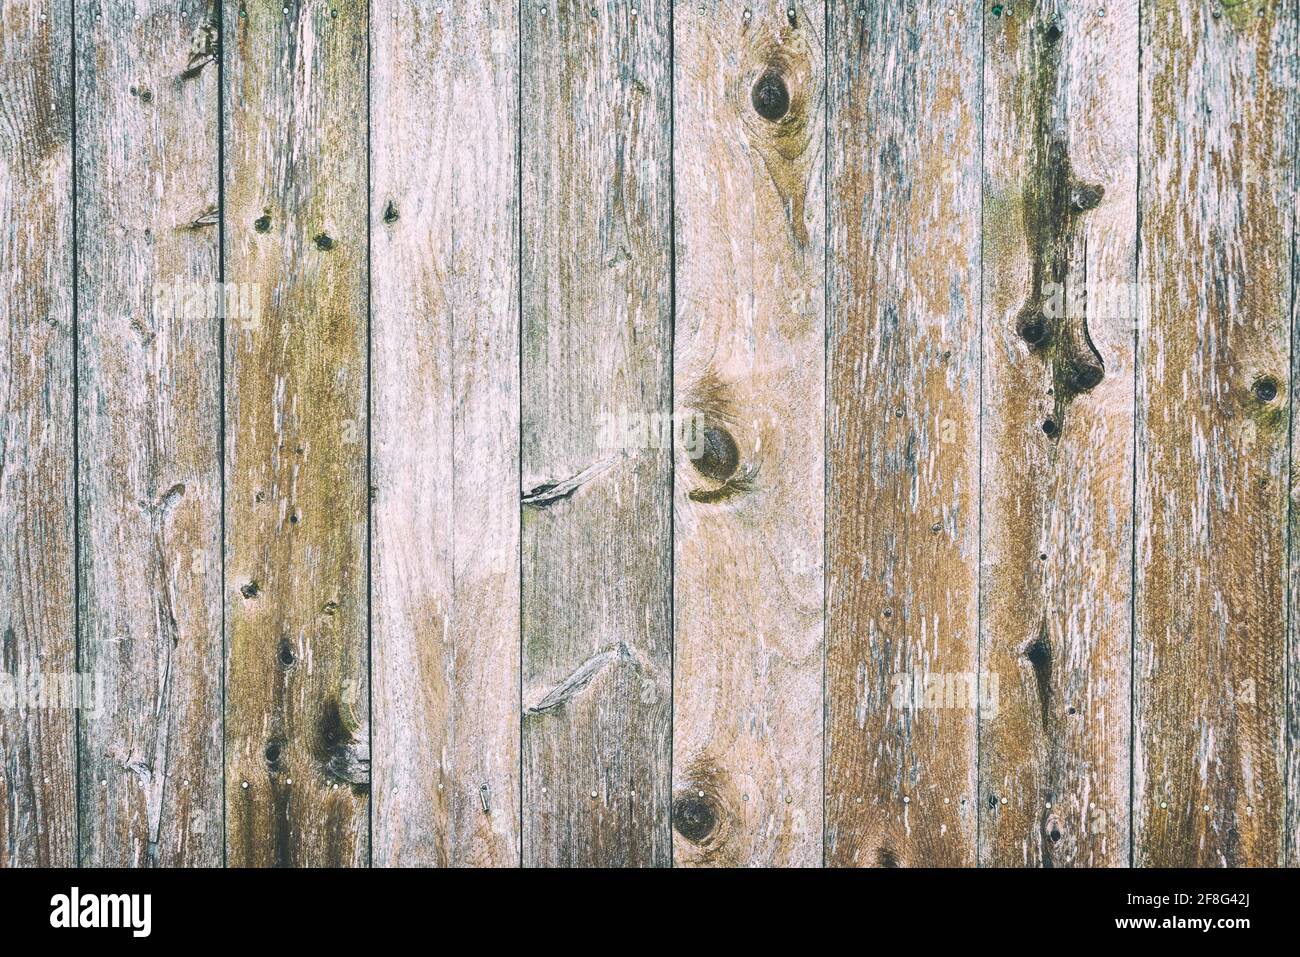 Wooden surface background or design element Stock Photo